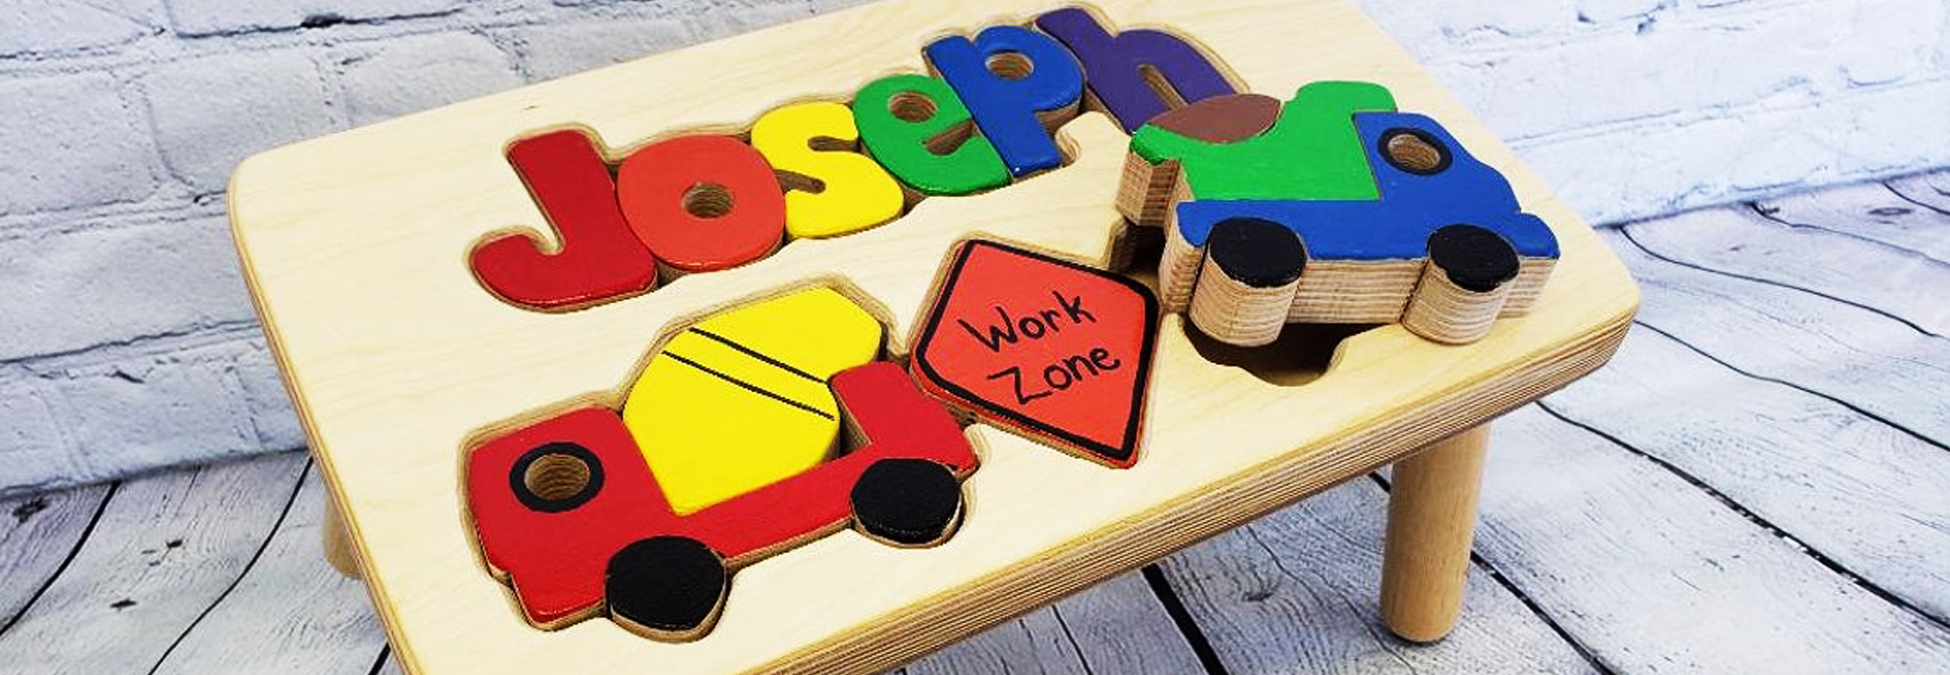 Personalized Wood Stools – Cubby Hole Toys